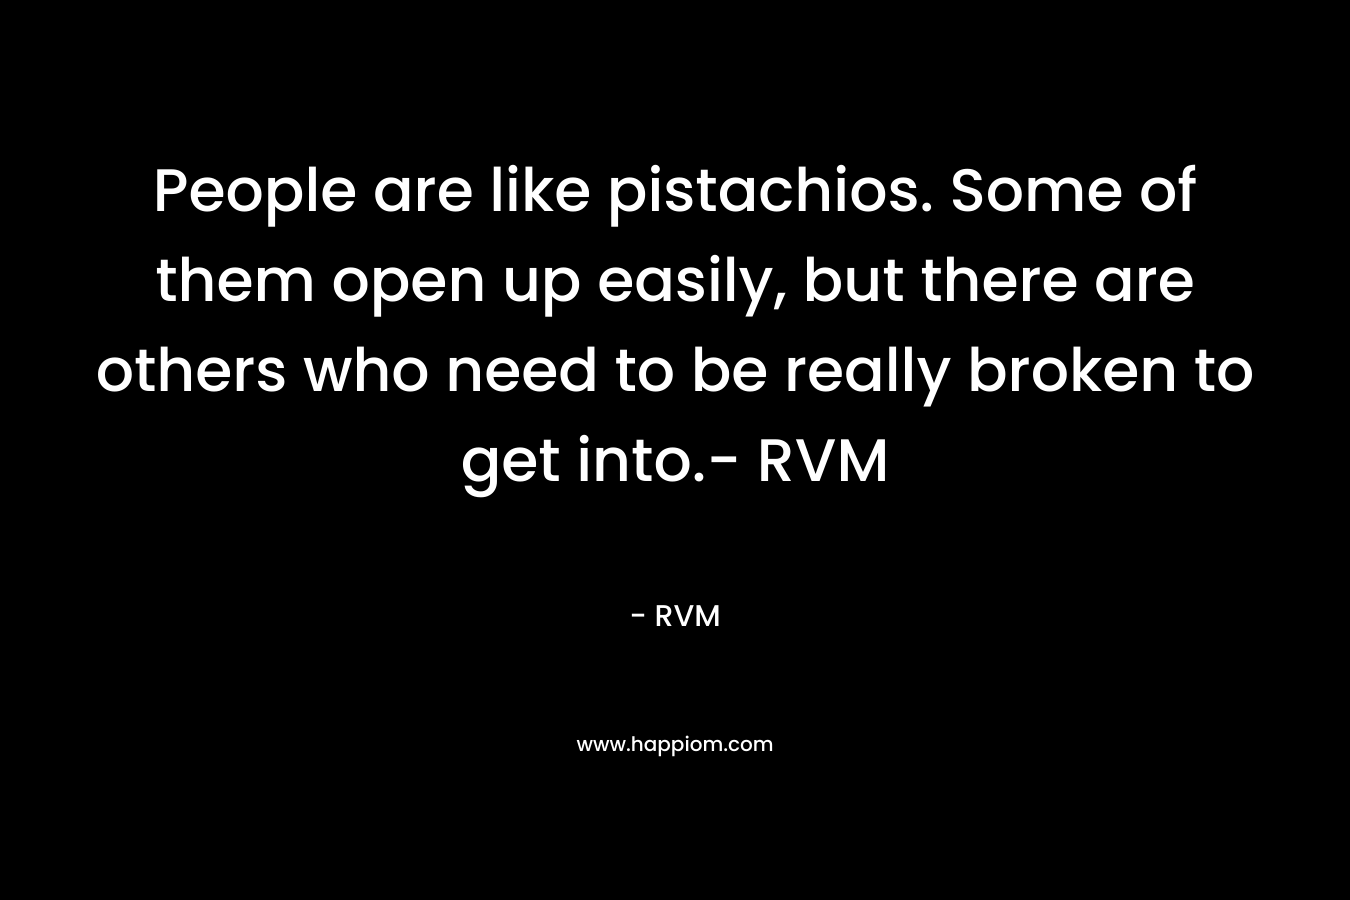 People are like pistachios. Some of them open up easily, but there are others who need to be really broken to get into.- RVM